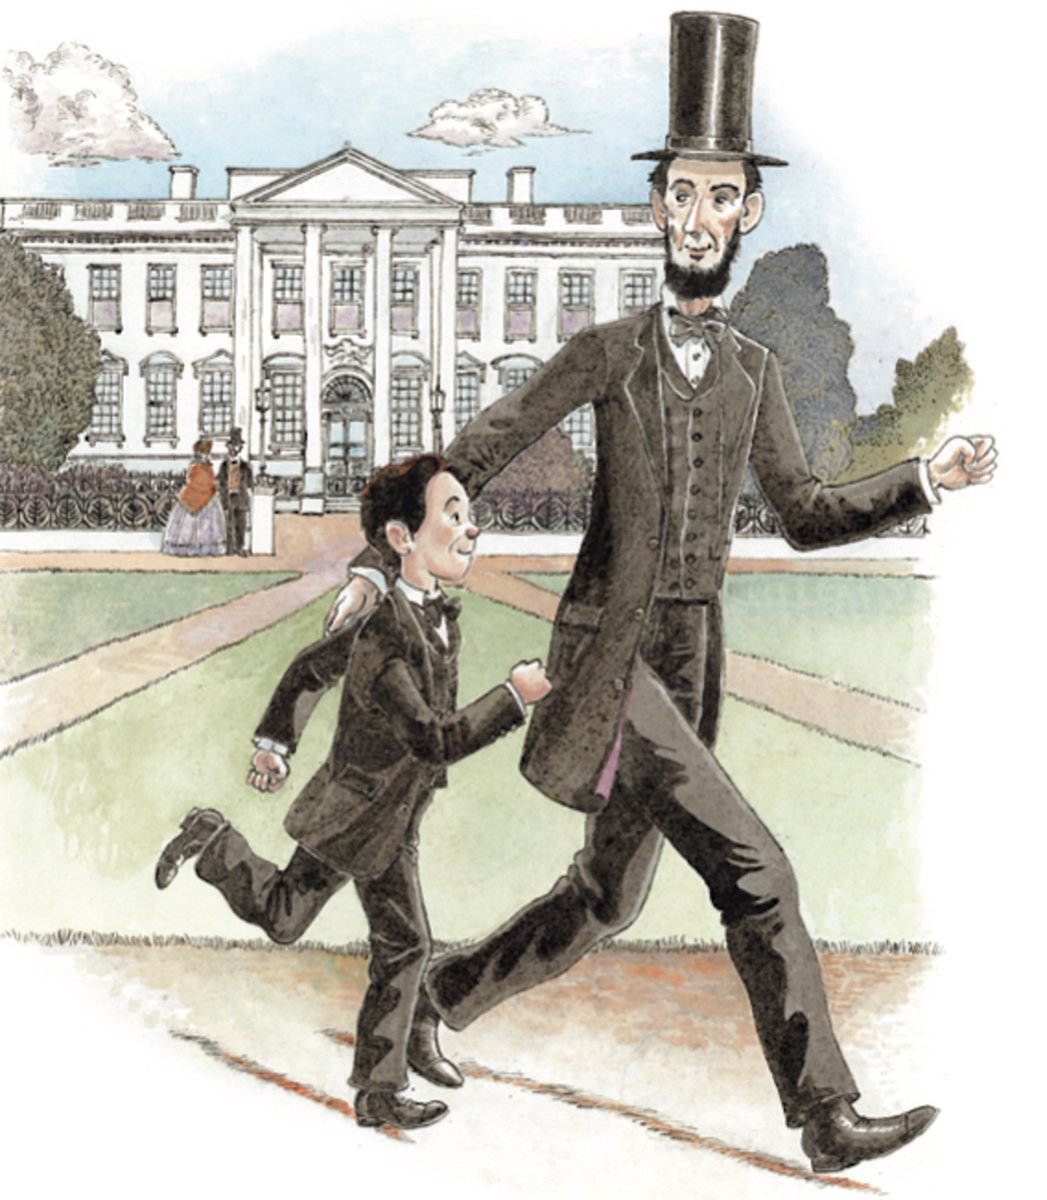 Happy Birthday Papa! ❤️With love and energy, Tad. 
🦃🐱🐶🐕🐇🐇🐕🐈‍⬛🐎🐎
@astrakidsbooks @ForGrowingMinds #Lincoln #whitehouse #kidlit #fatherandson #learningdifferences